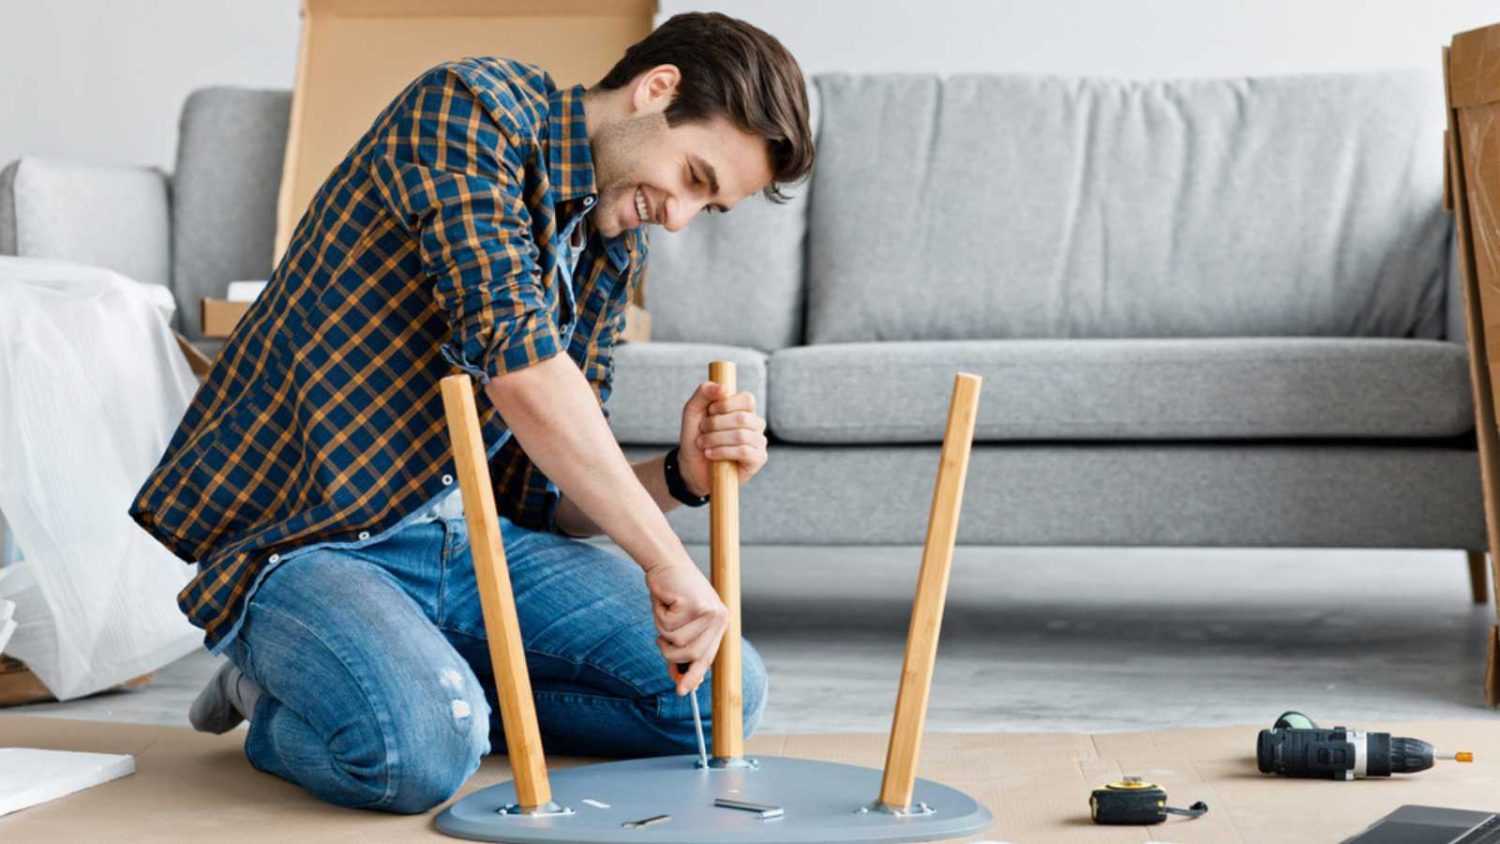 Furniture repair and assembly, handyman fixing table using tool, assembling at home after renovation. Happy millennial handsome guy screwing detail with screwdriver in living room interior, indoor